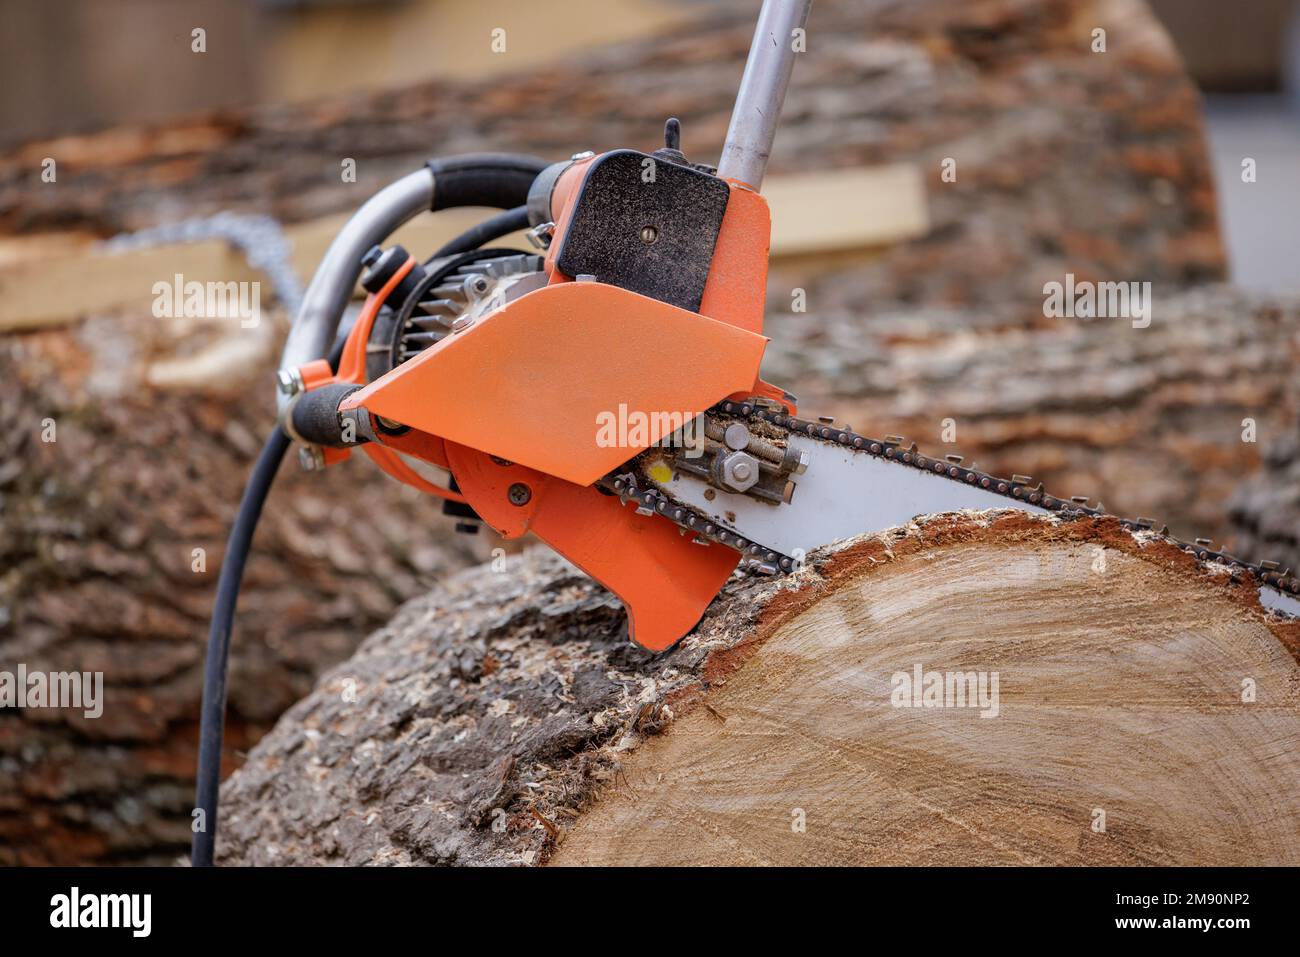 Woodcutter saws tree with electric chain saw on sawmill. Chainsaw used in activities such as tree felling, pruning, cutting firebreaks in wildland fir Stock Photo